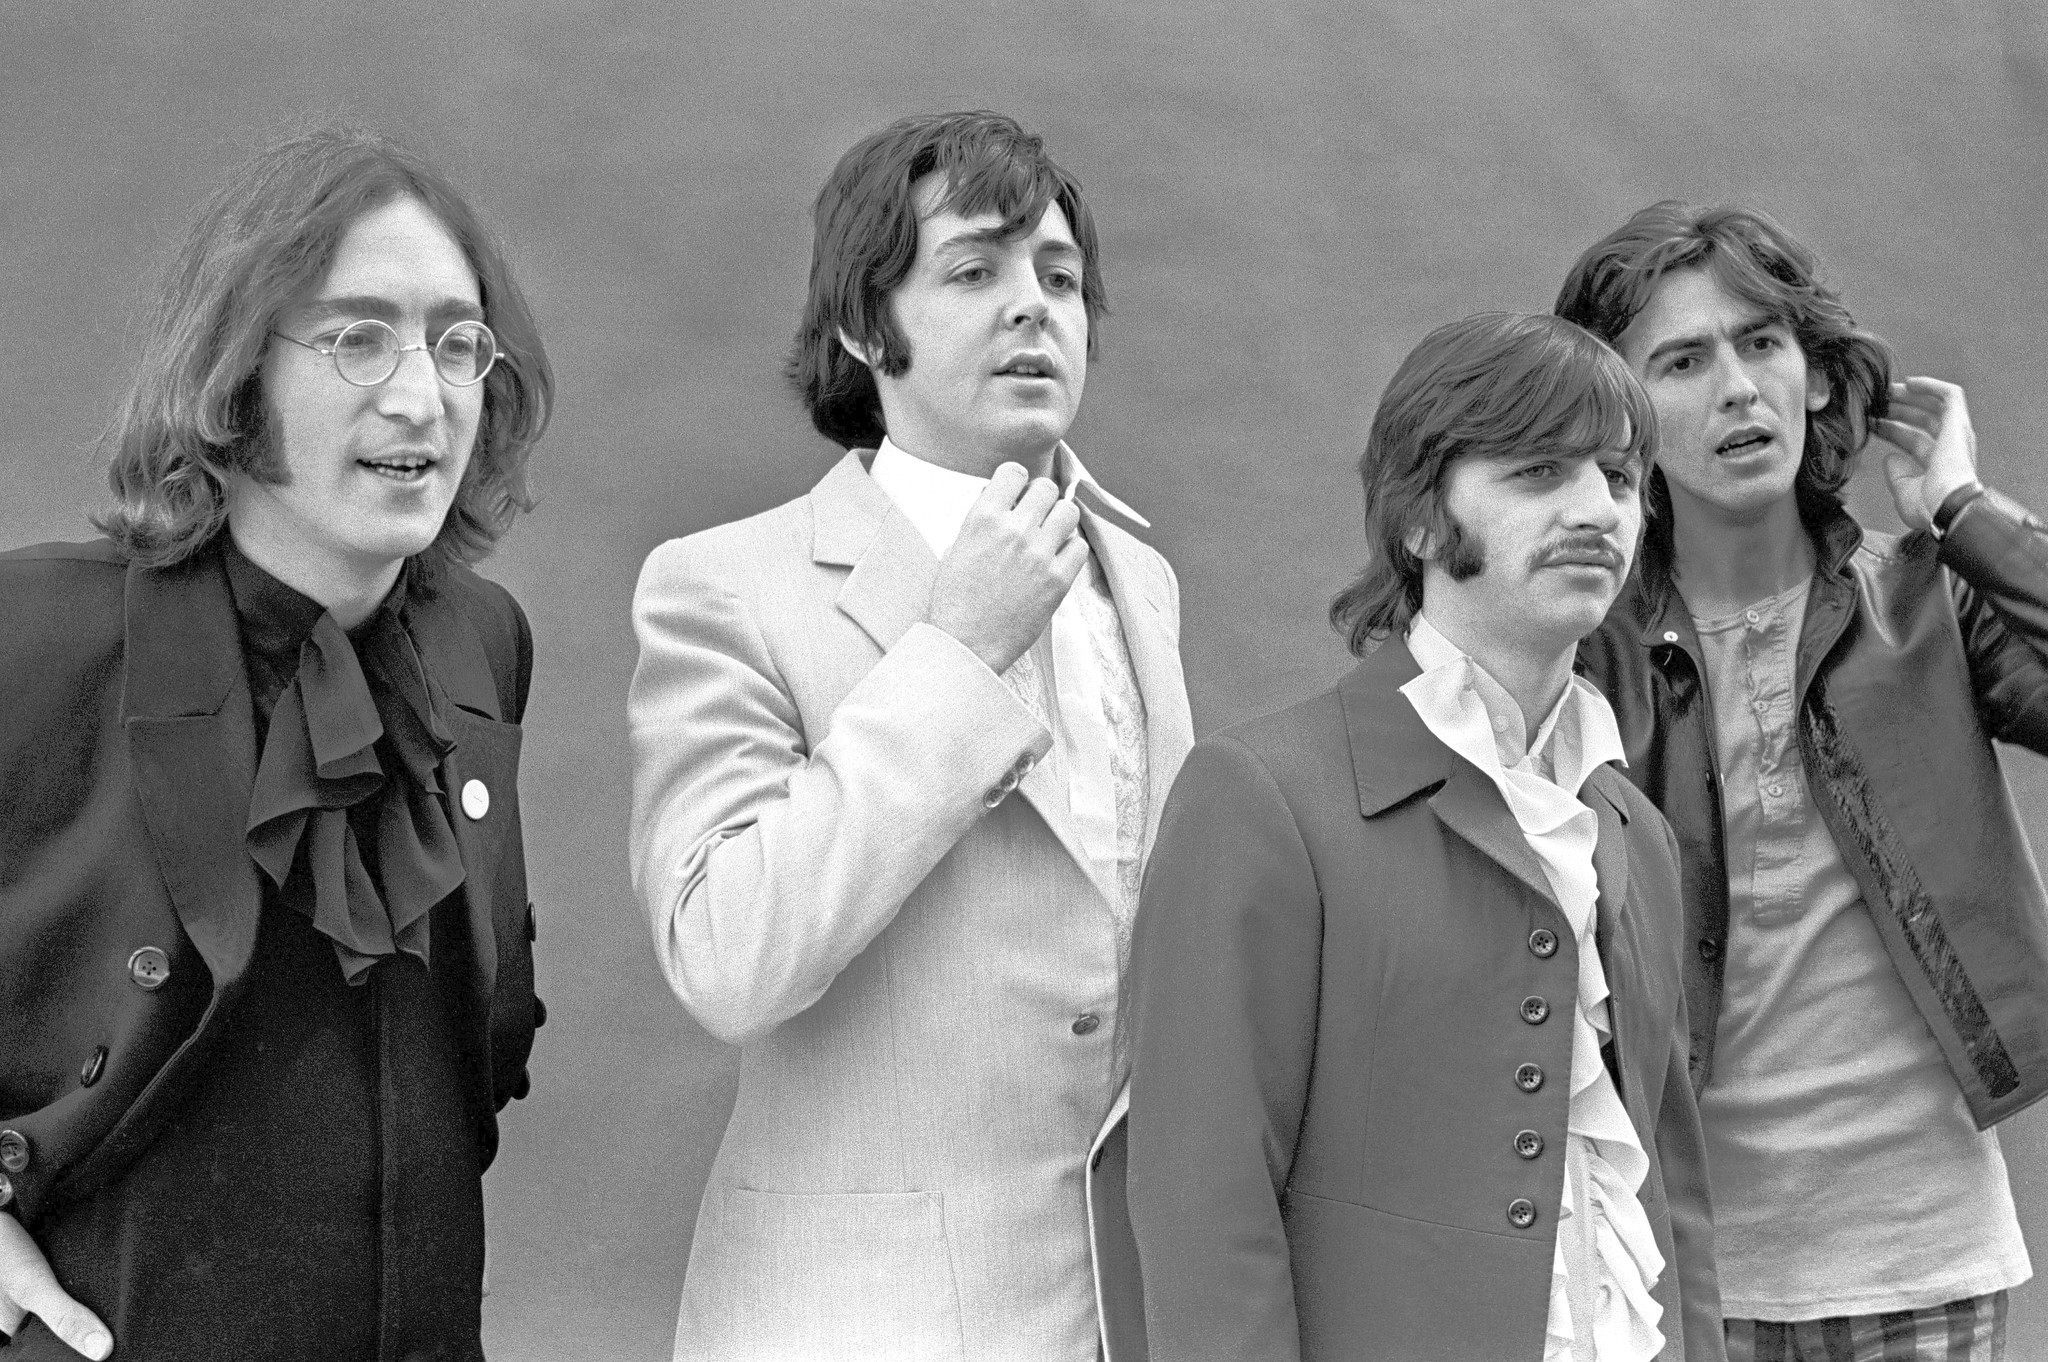 Do you want to know a secret? The Beatles are better in mono